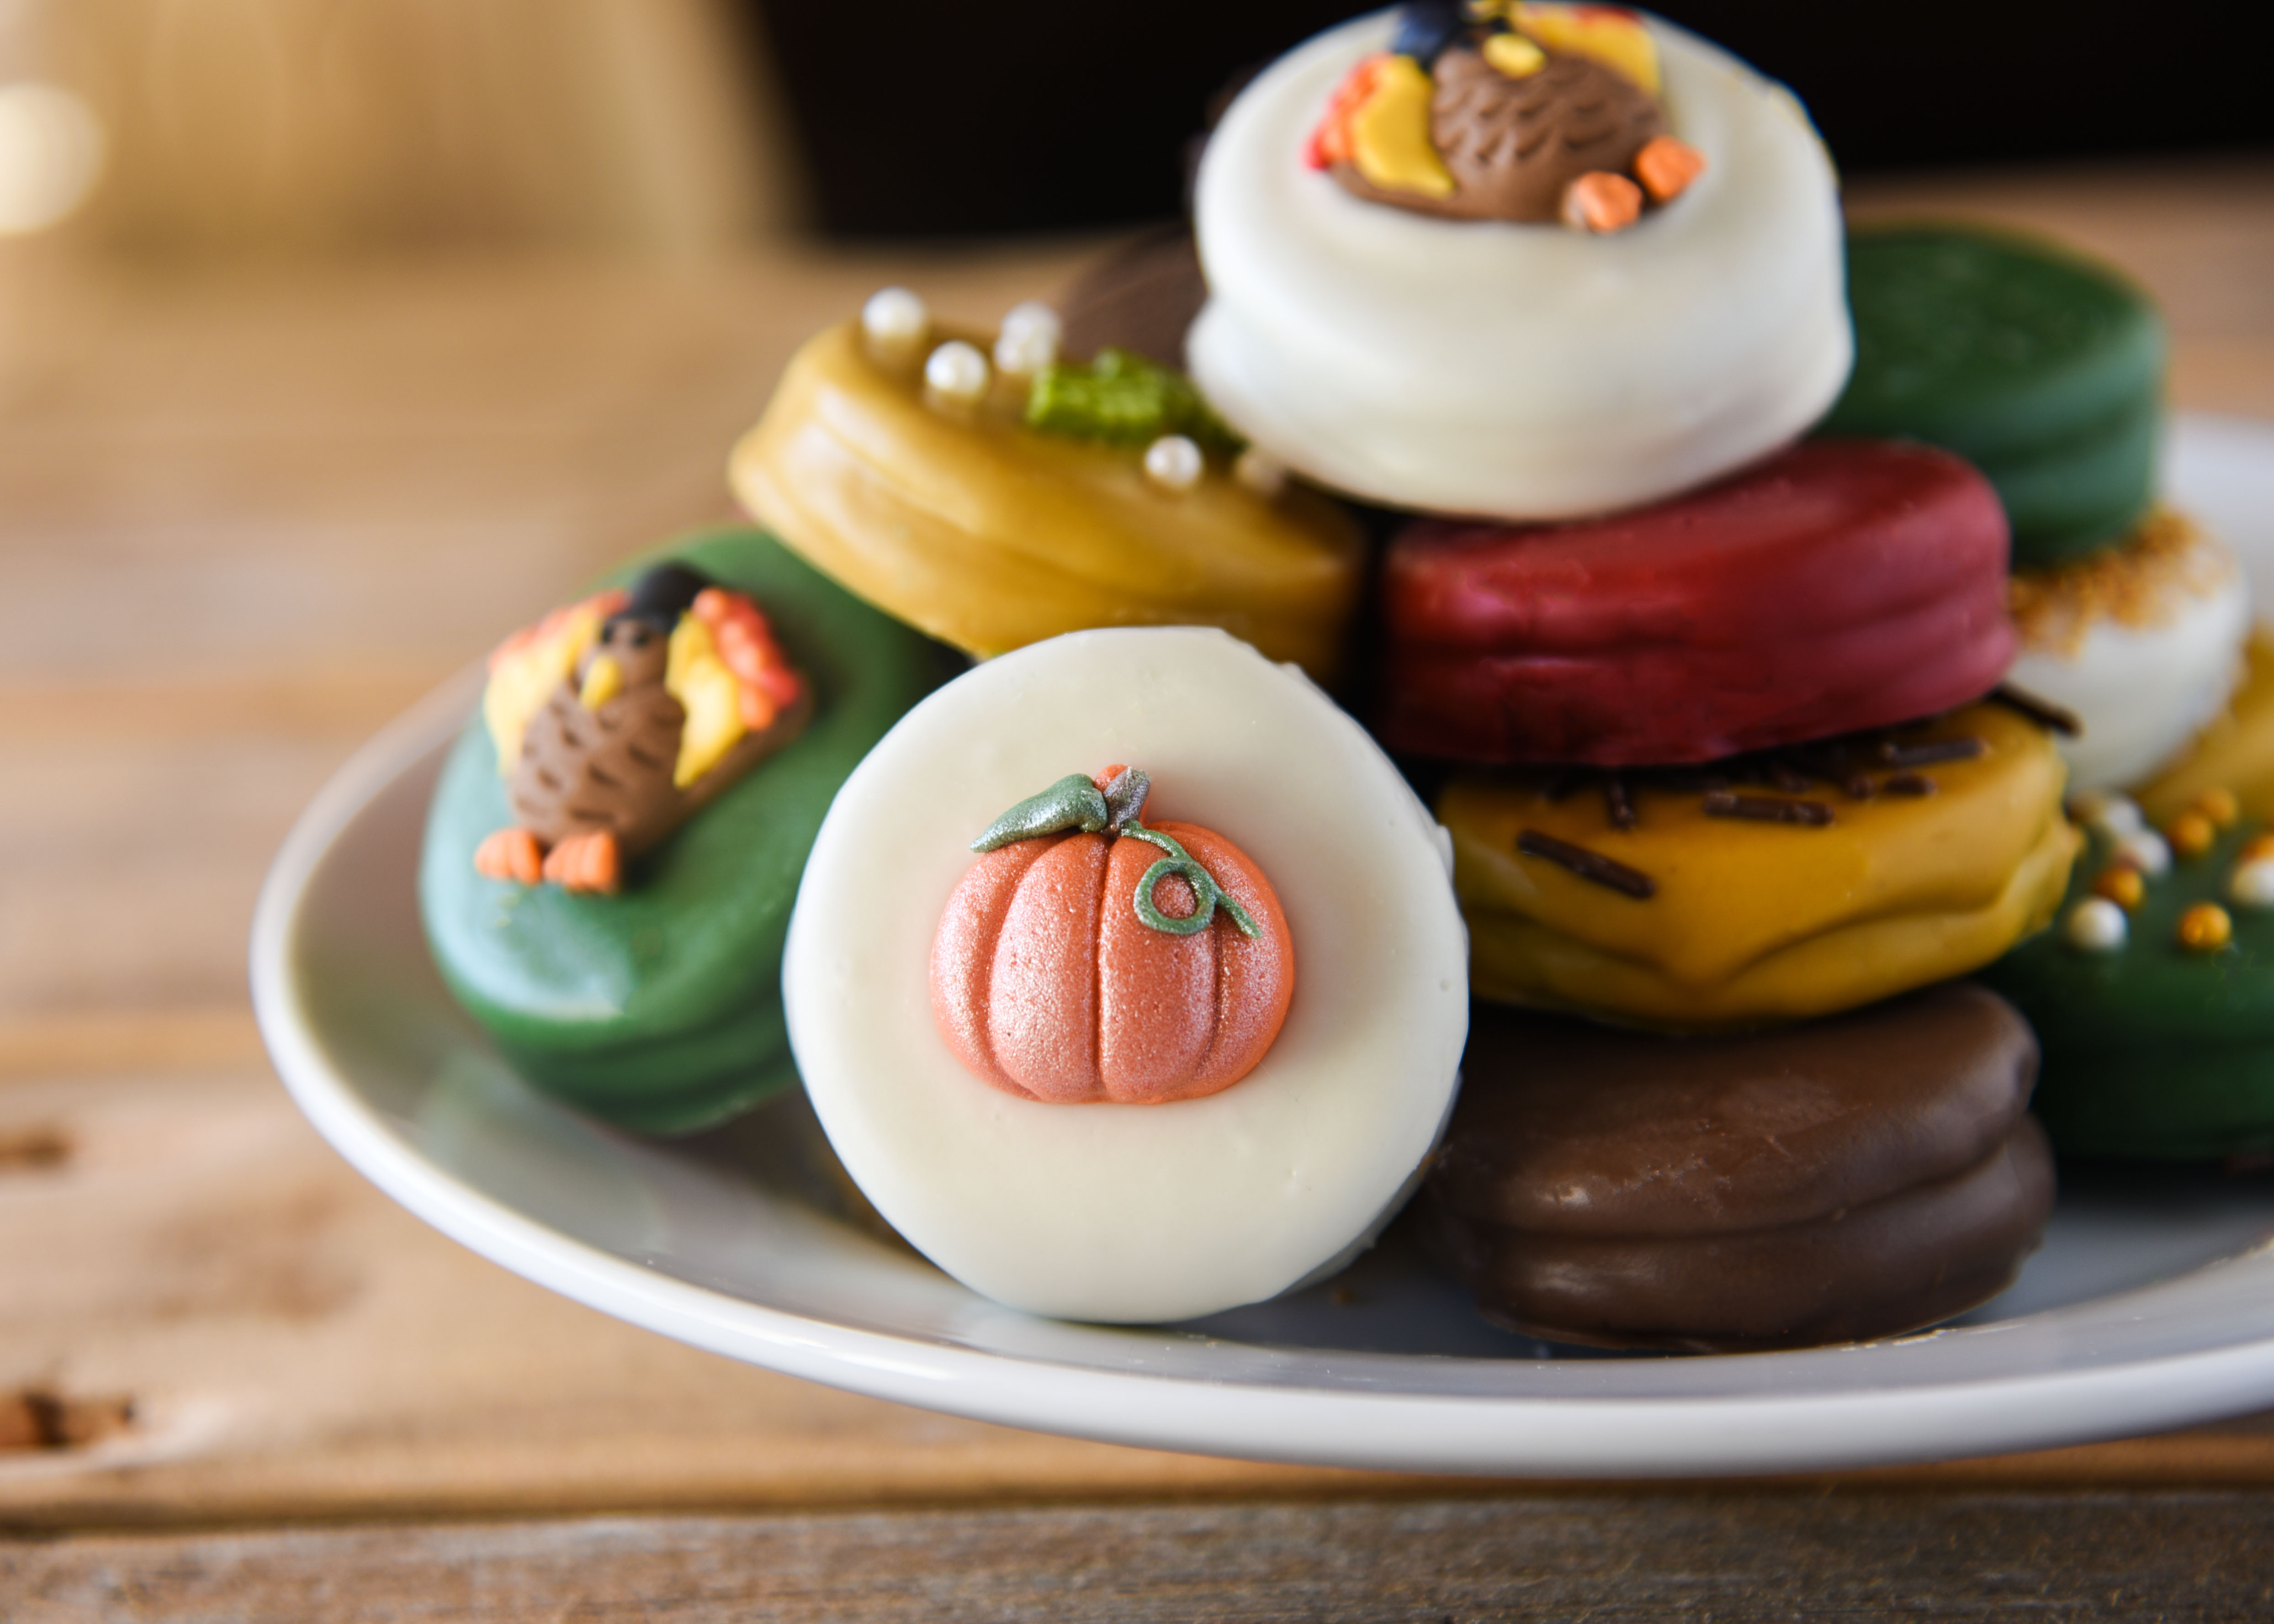 Oreos dipped in festive colors and decorated for Thanksgiving! A perfect treat for the dessert table.